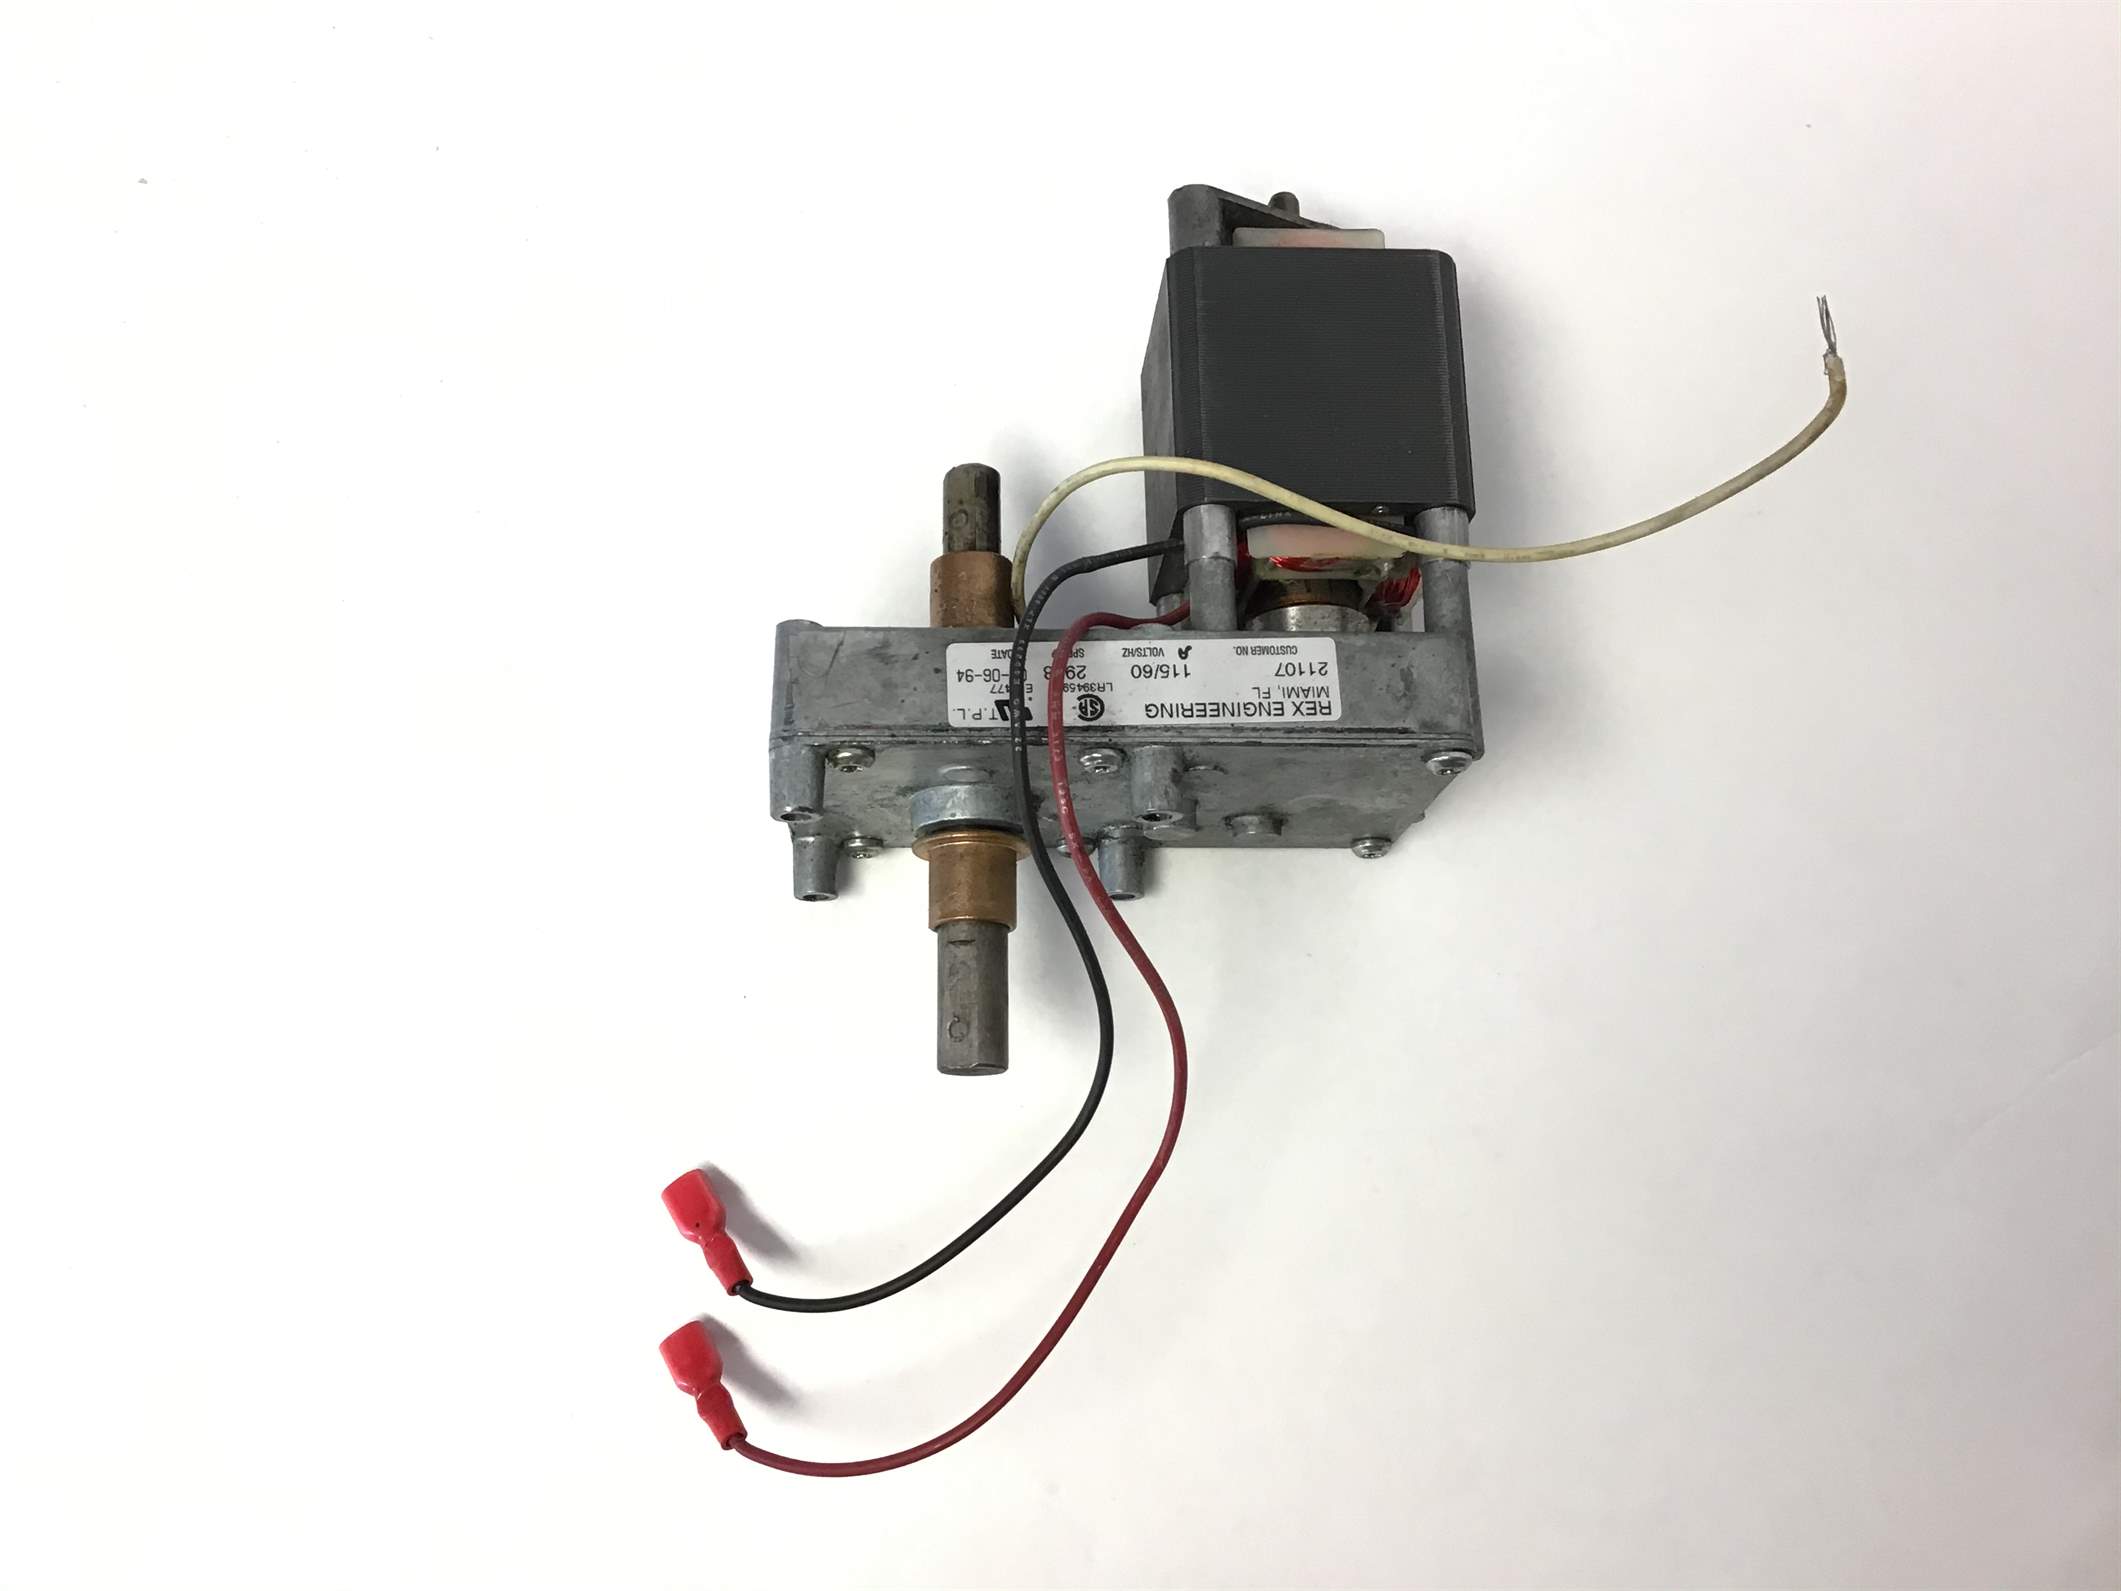 Incline Lift Motor (Used)